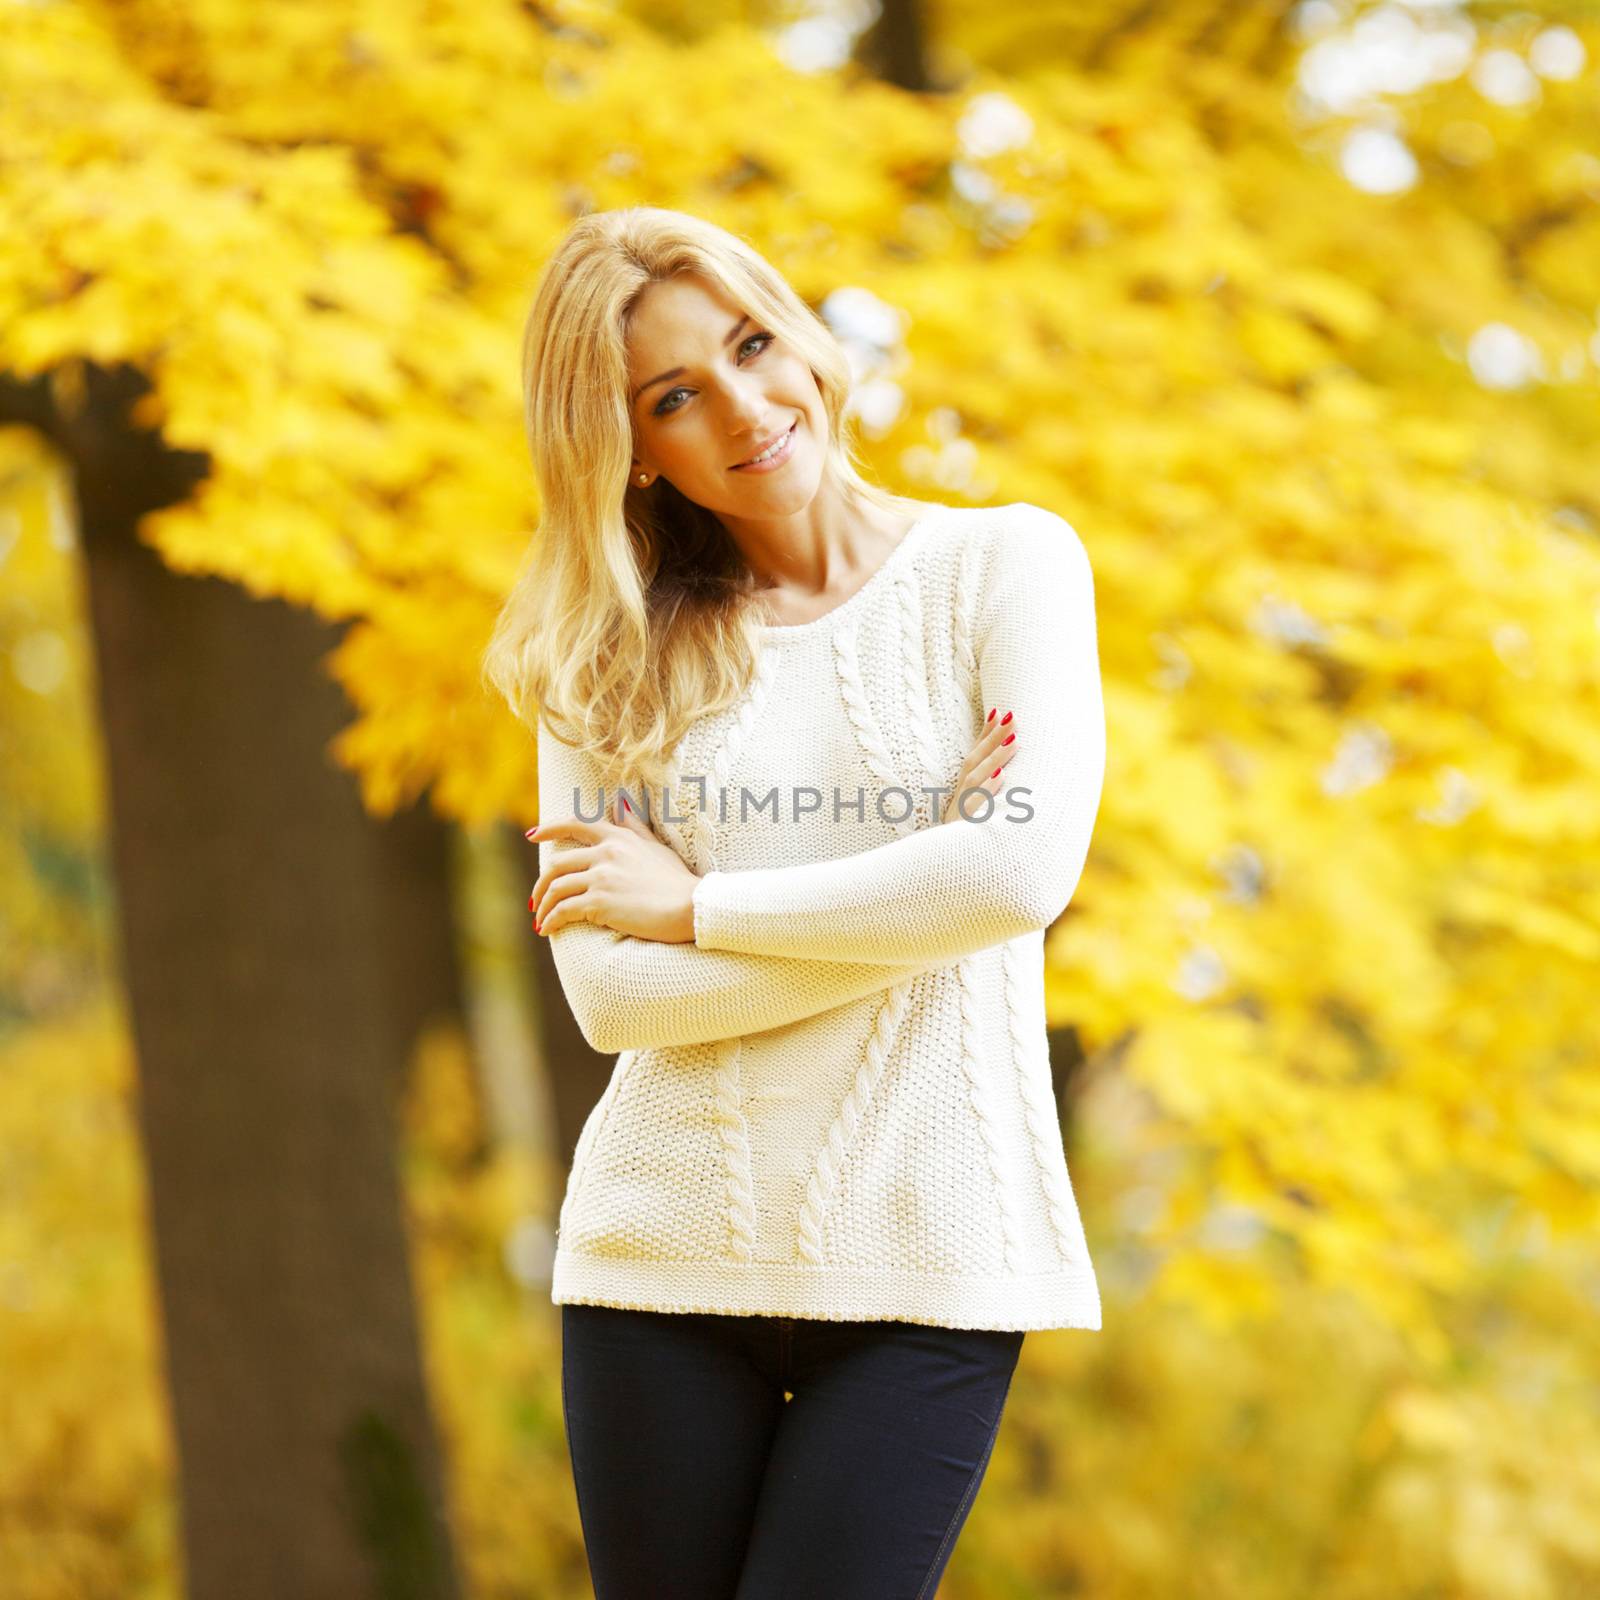 Portrait of beautiful young woman walking outdoors in autumn park